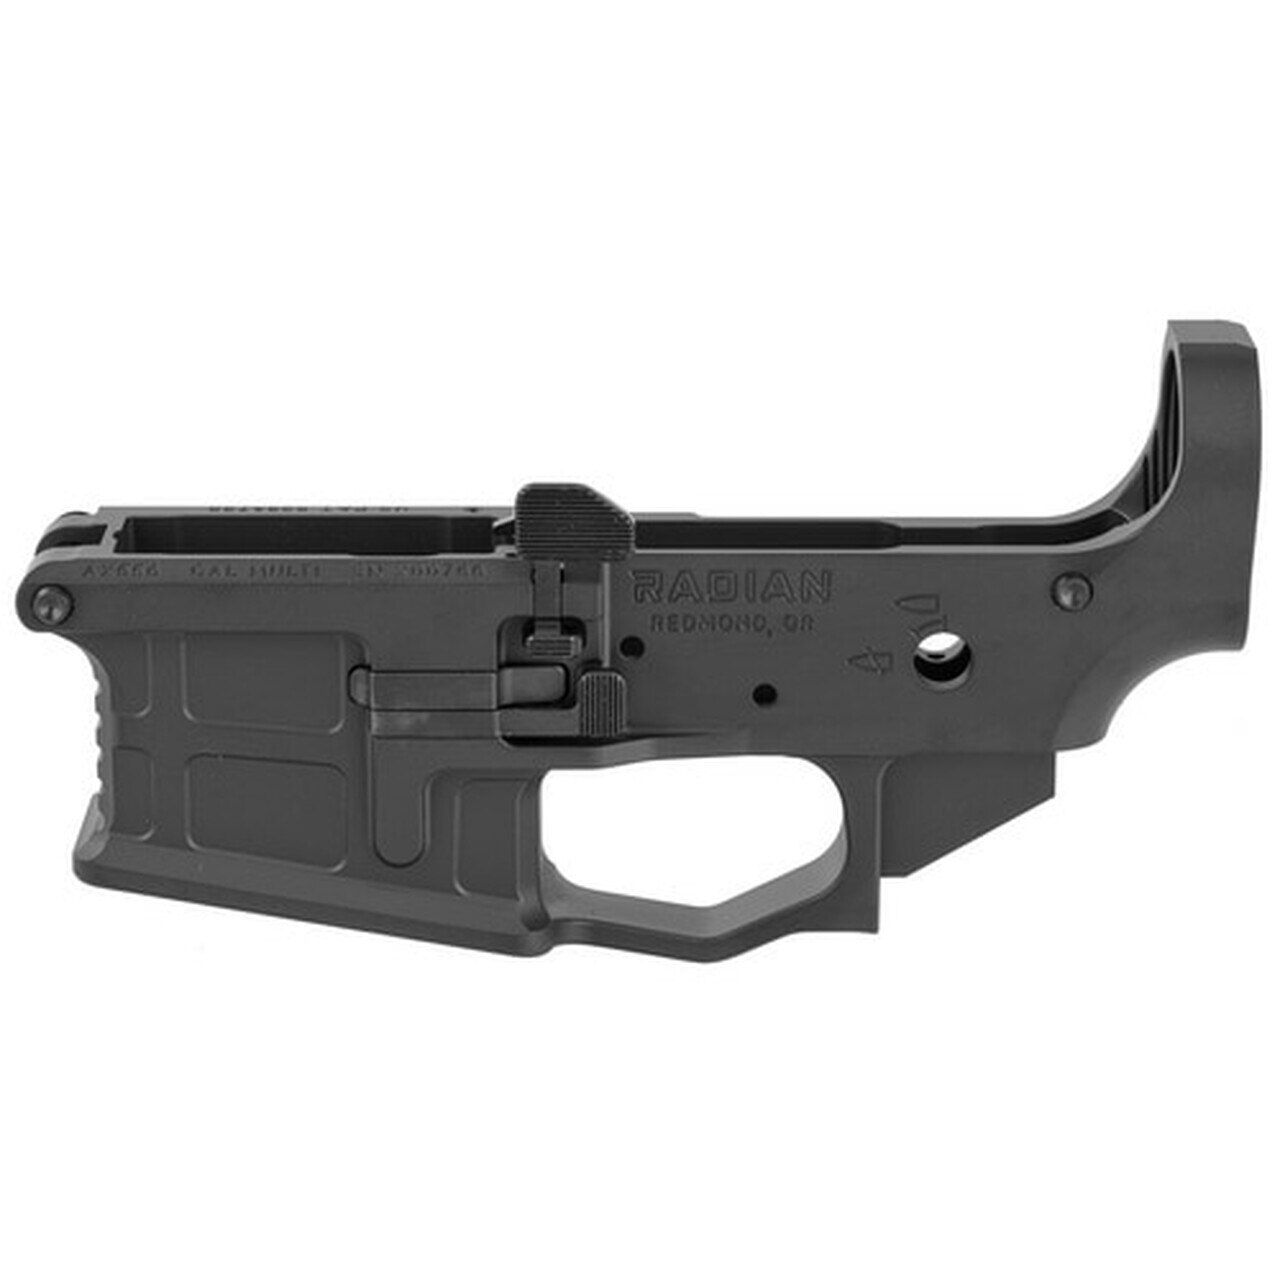 Image of Radian Weapons AX556 Stripped Billet Lower, 223 Rem/5.56mm, Ambidextrous, Black